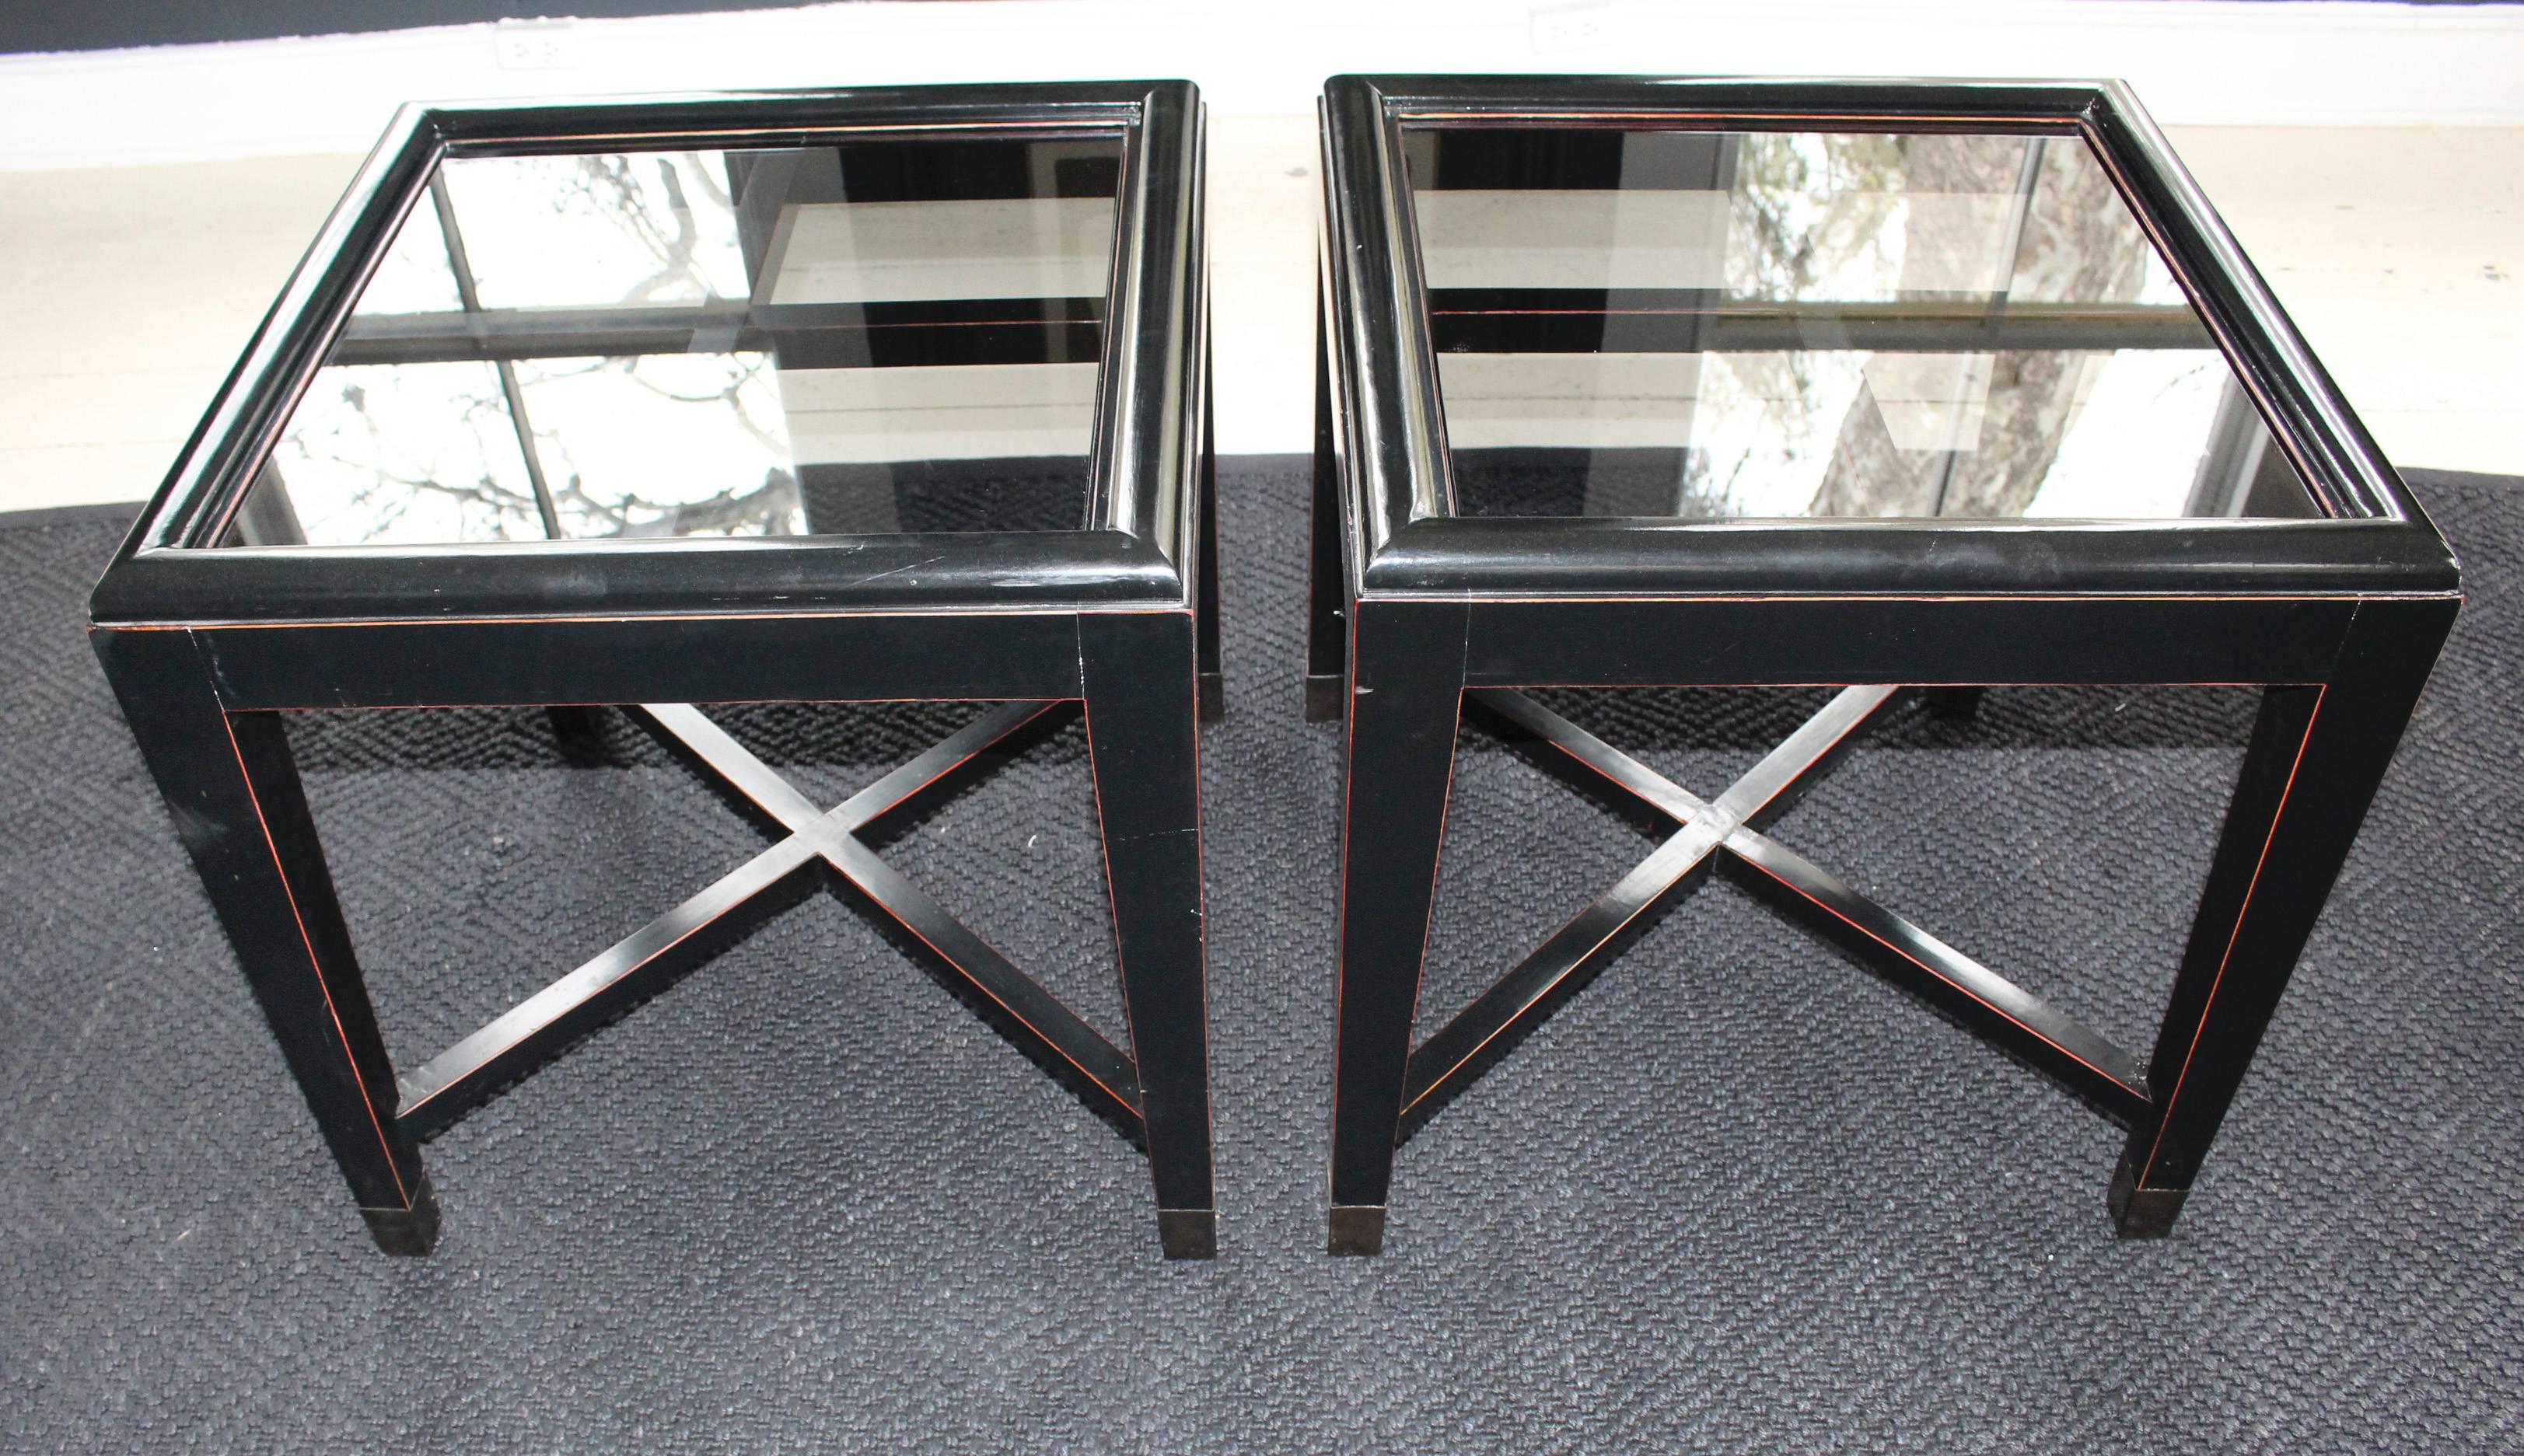 Pair of ebonized tables, late 20th century, with recessed glass tops are further distinguished with elegantly tapered legs wrapped with brass sabots and X-stretcher base. Tables are finished in a Classic asian two-tone technique with ebony over